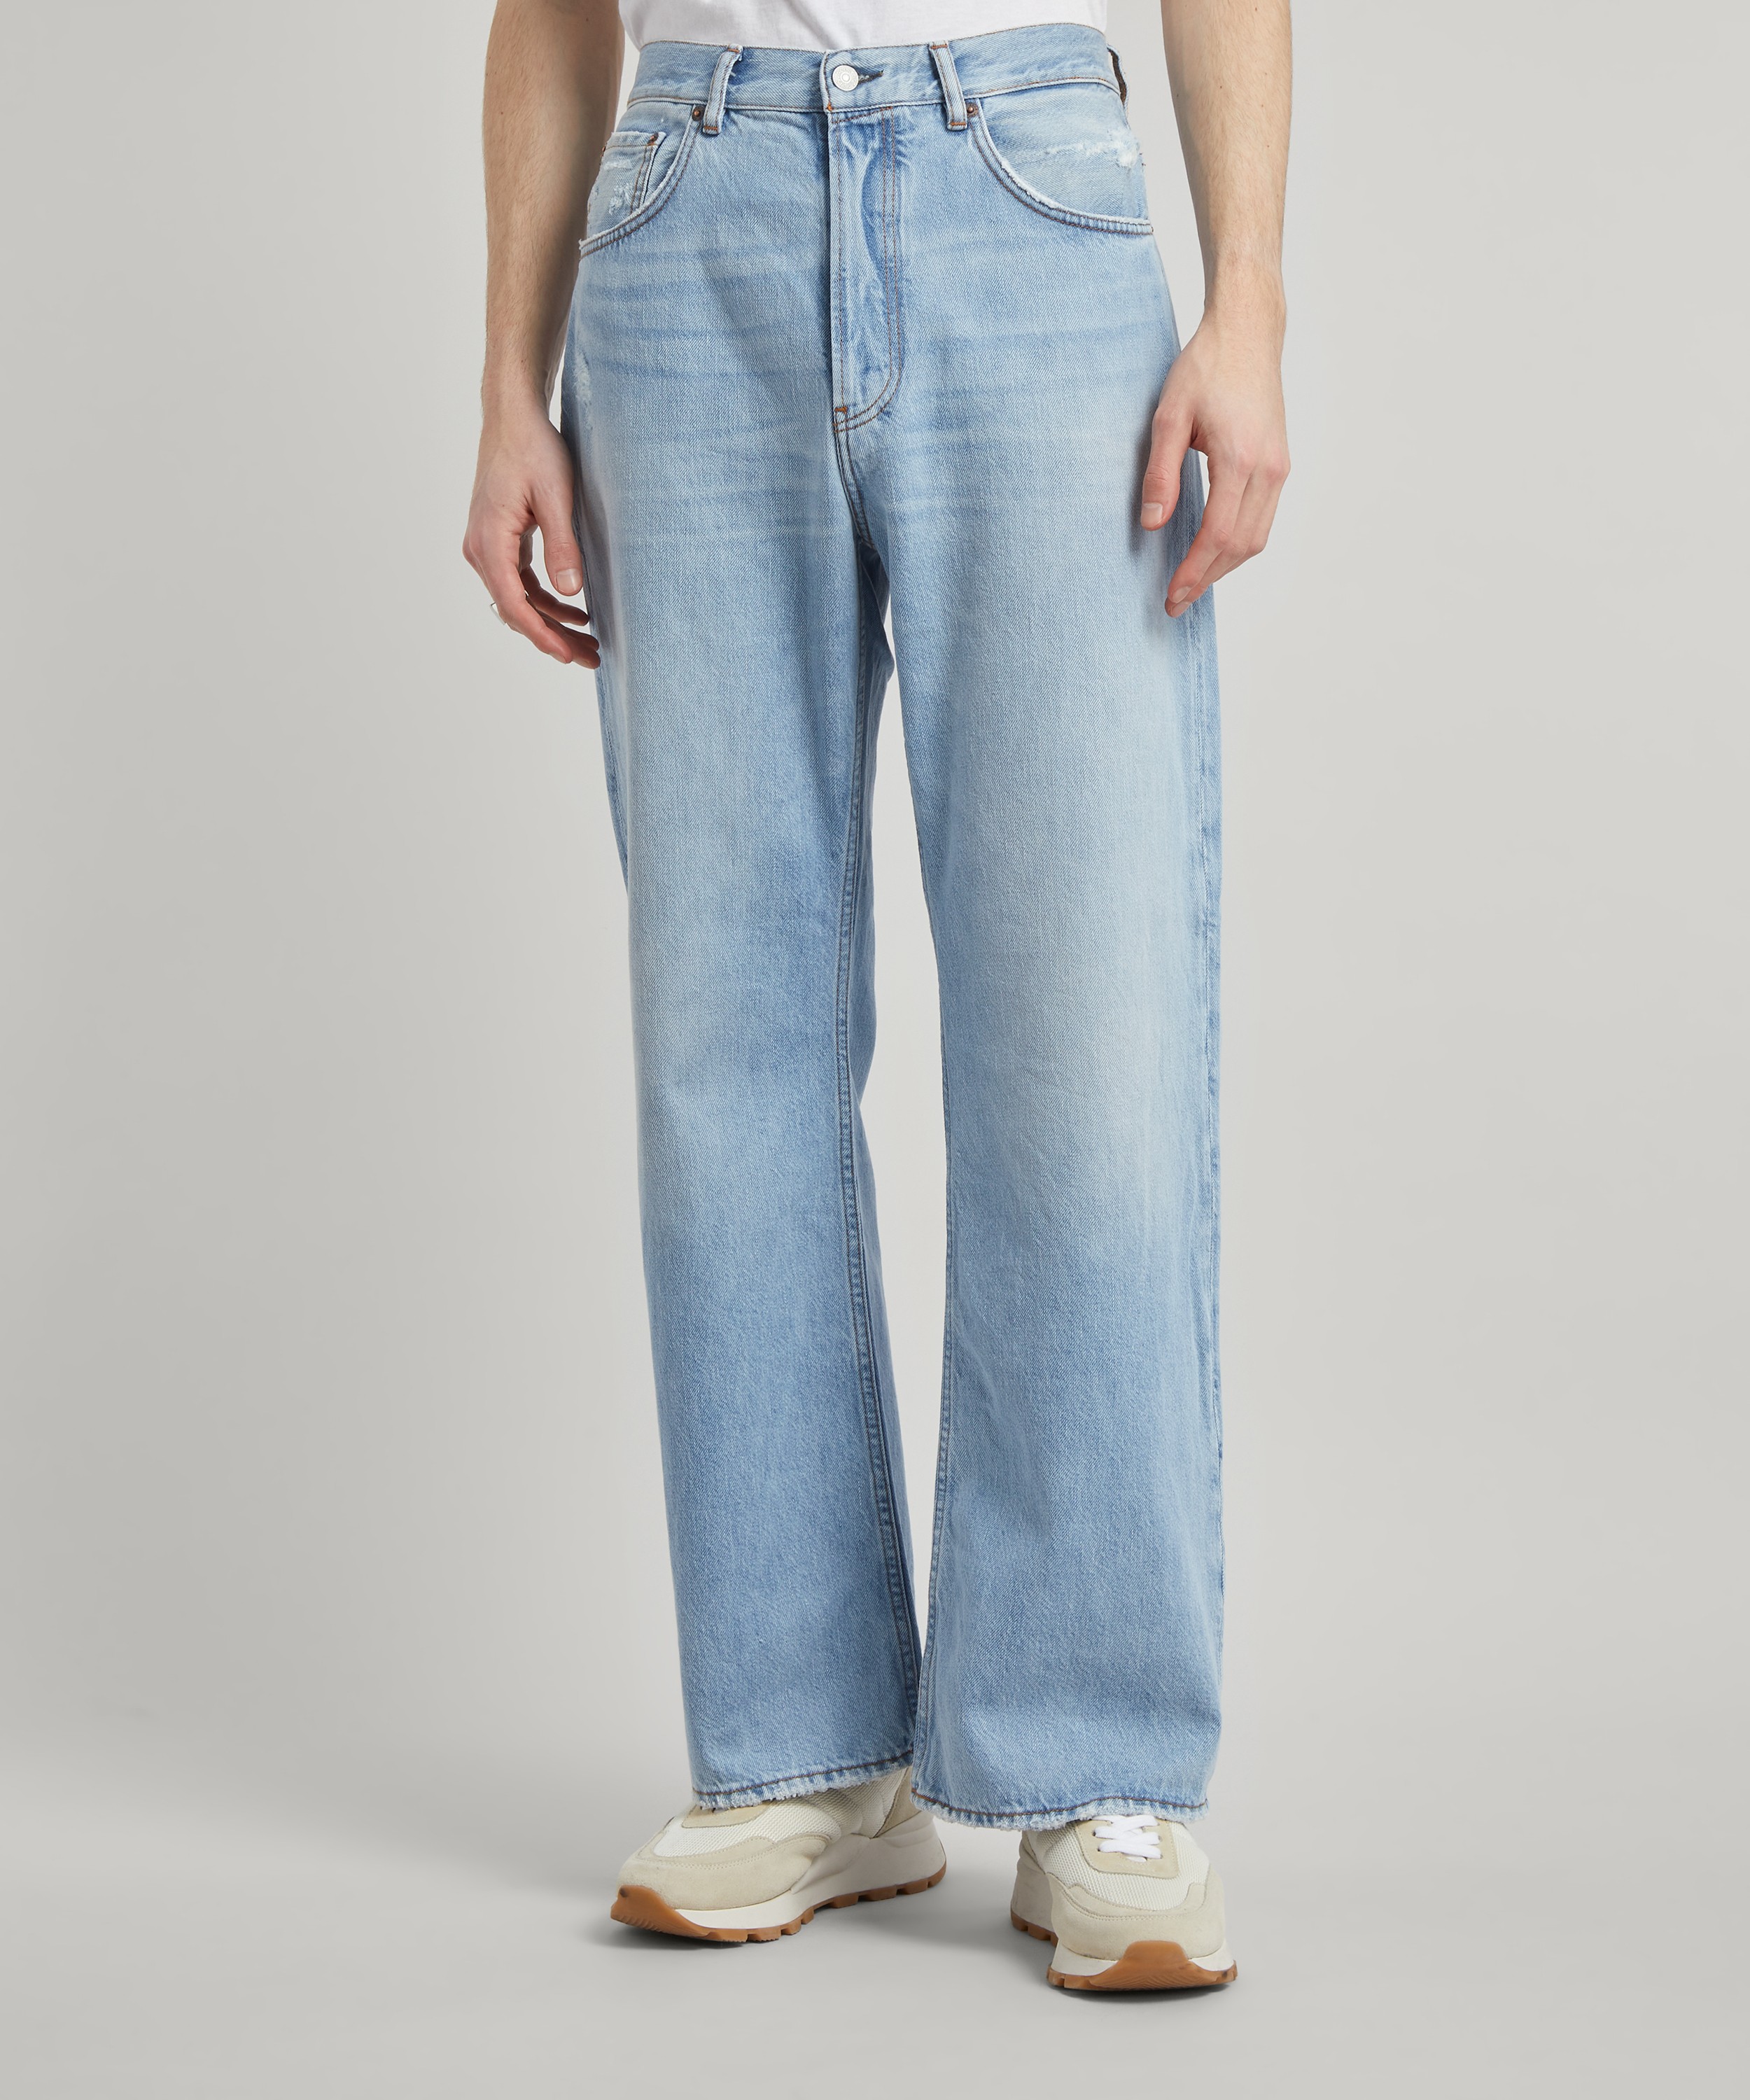 Acne Studios   21AW Bootcut fit jeans